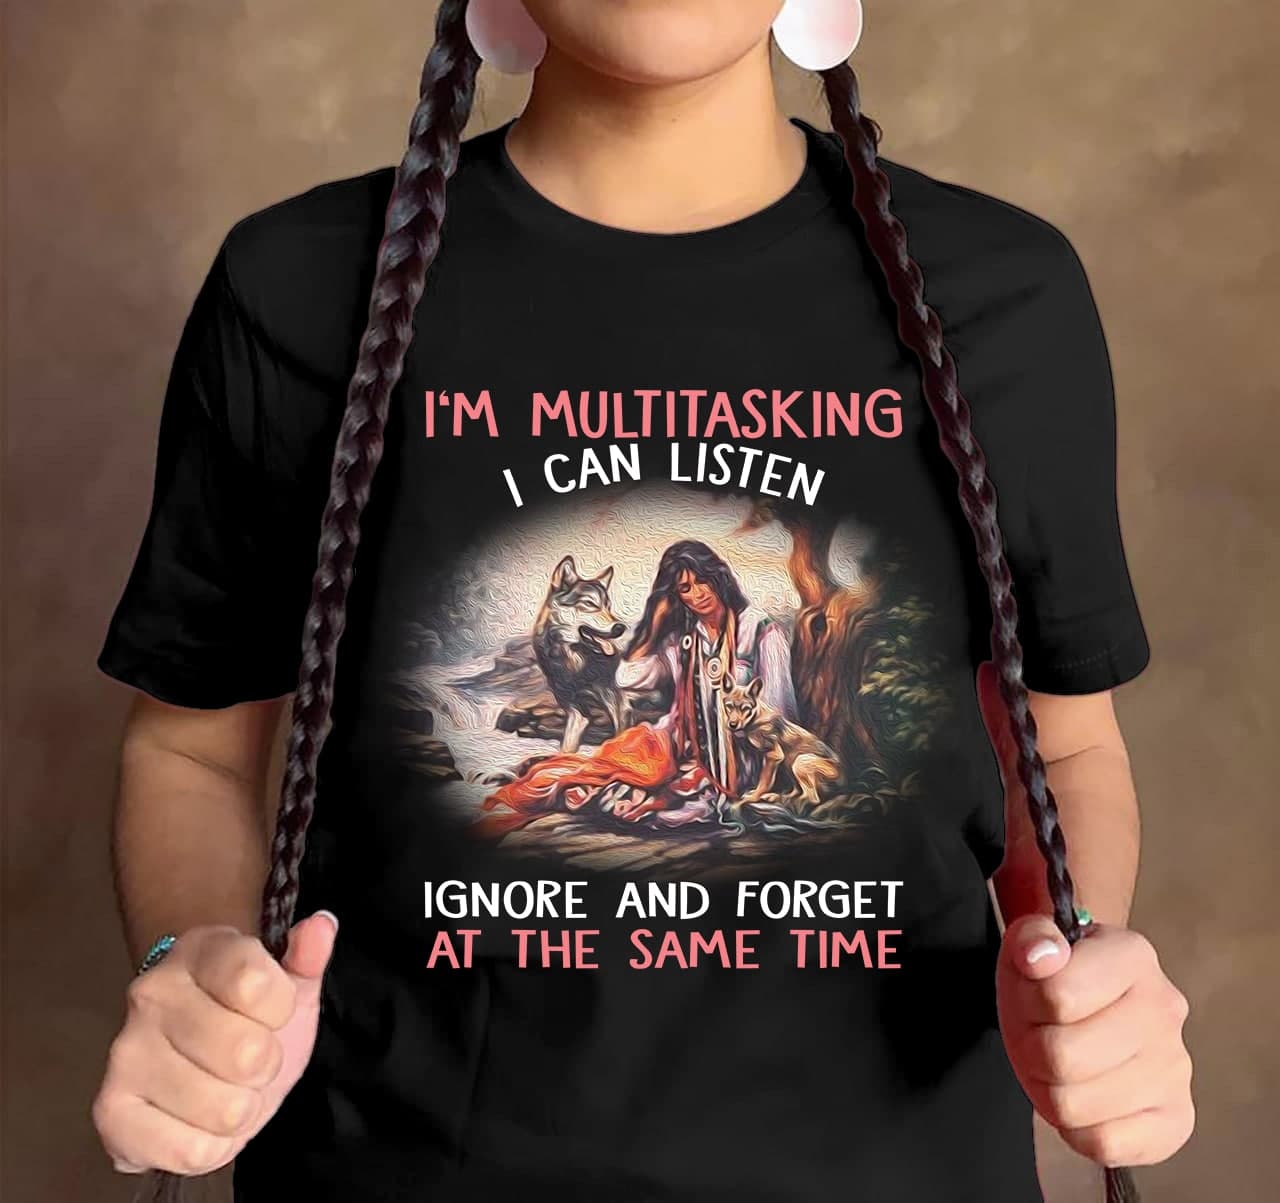 I'm multitasking I can listen ignore and forget at the same time - Multitasking woman, forest girl and wolf